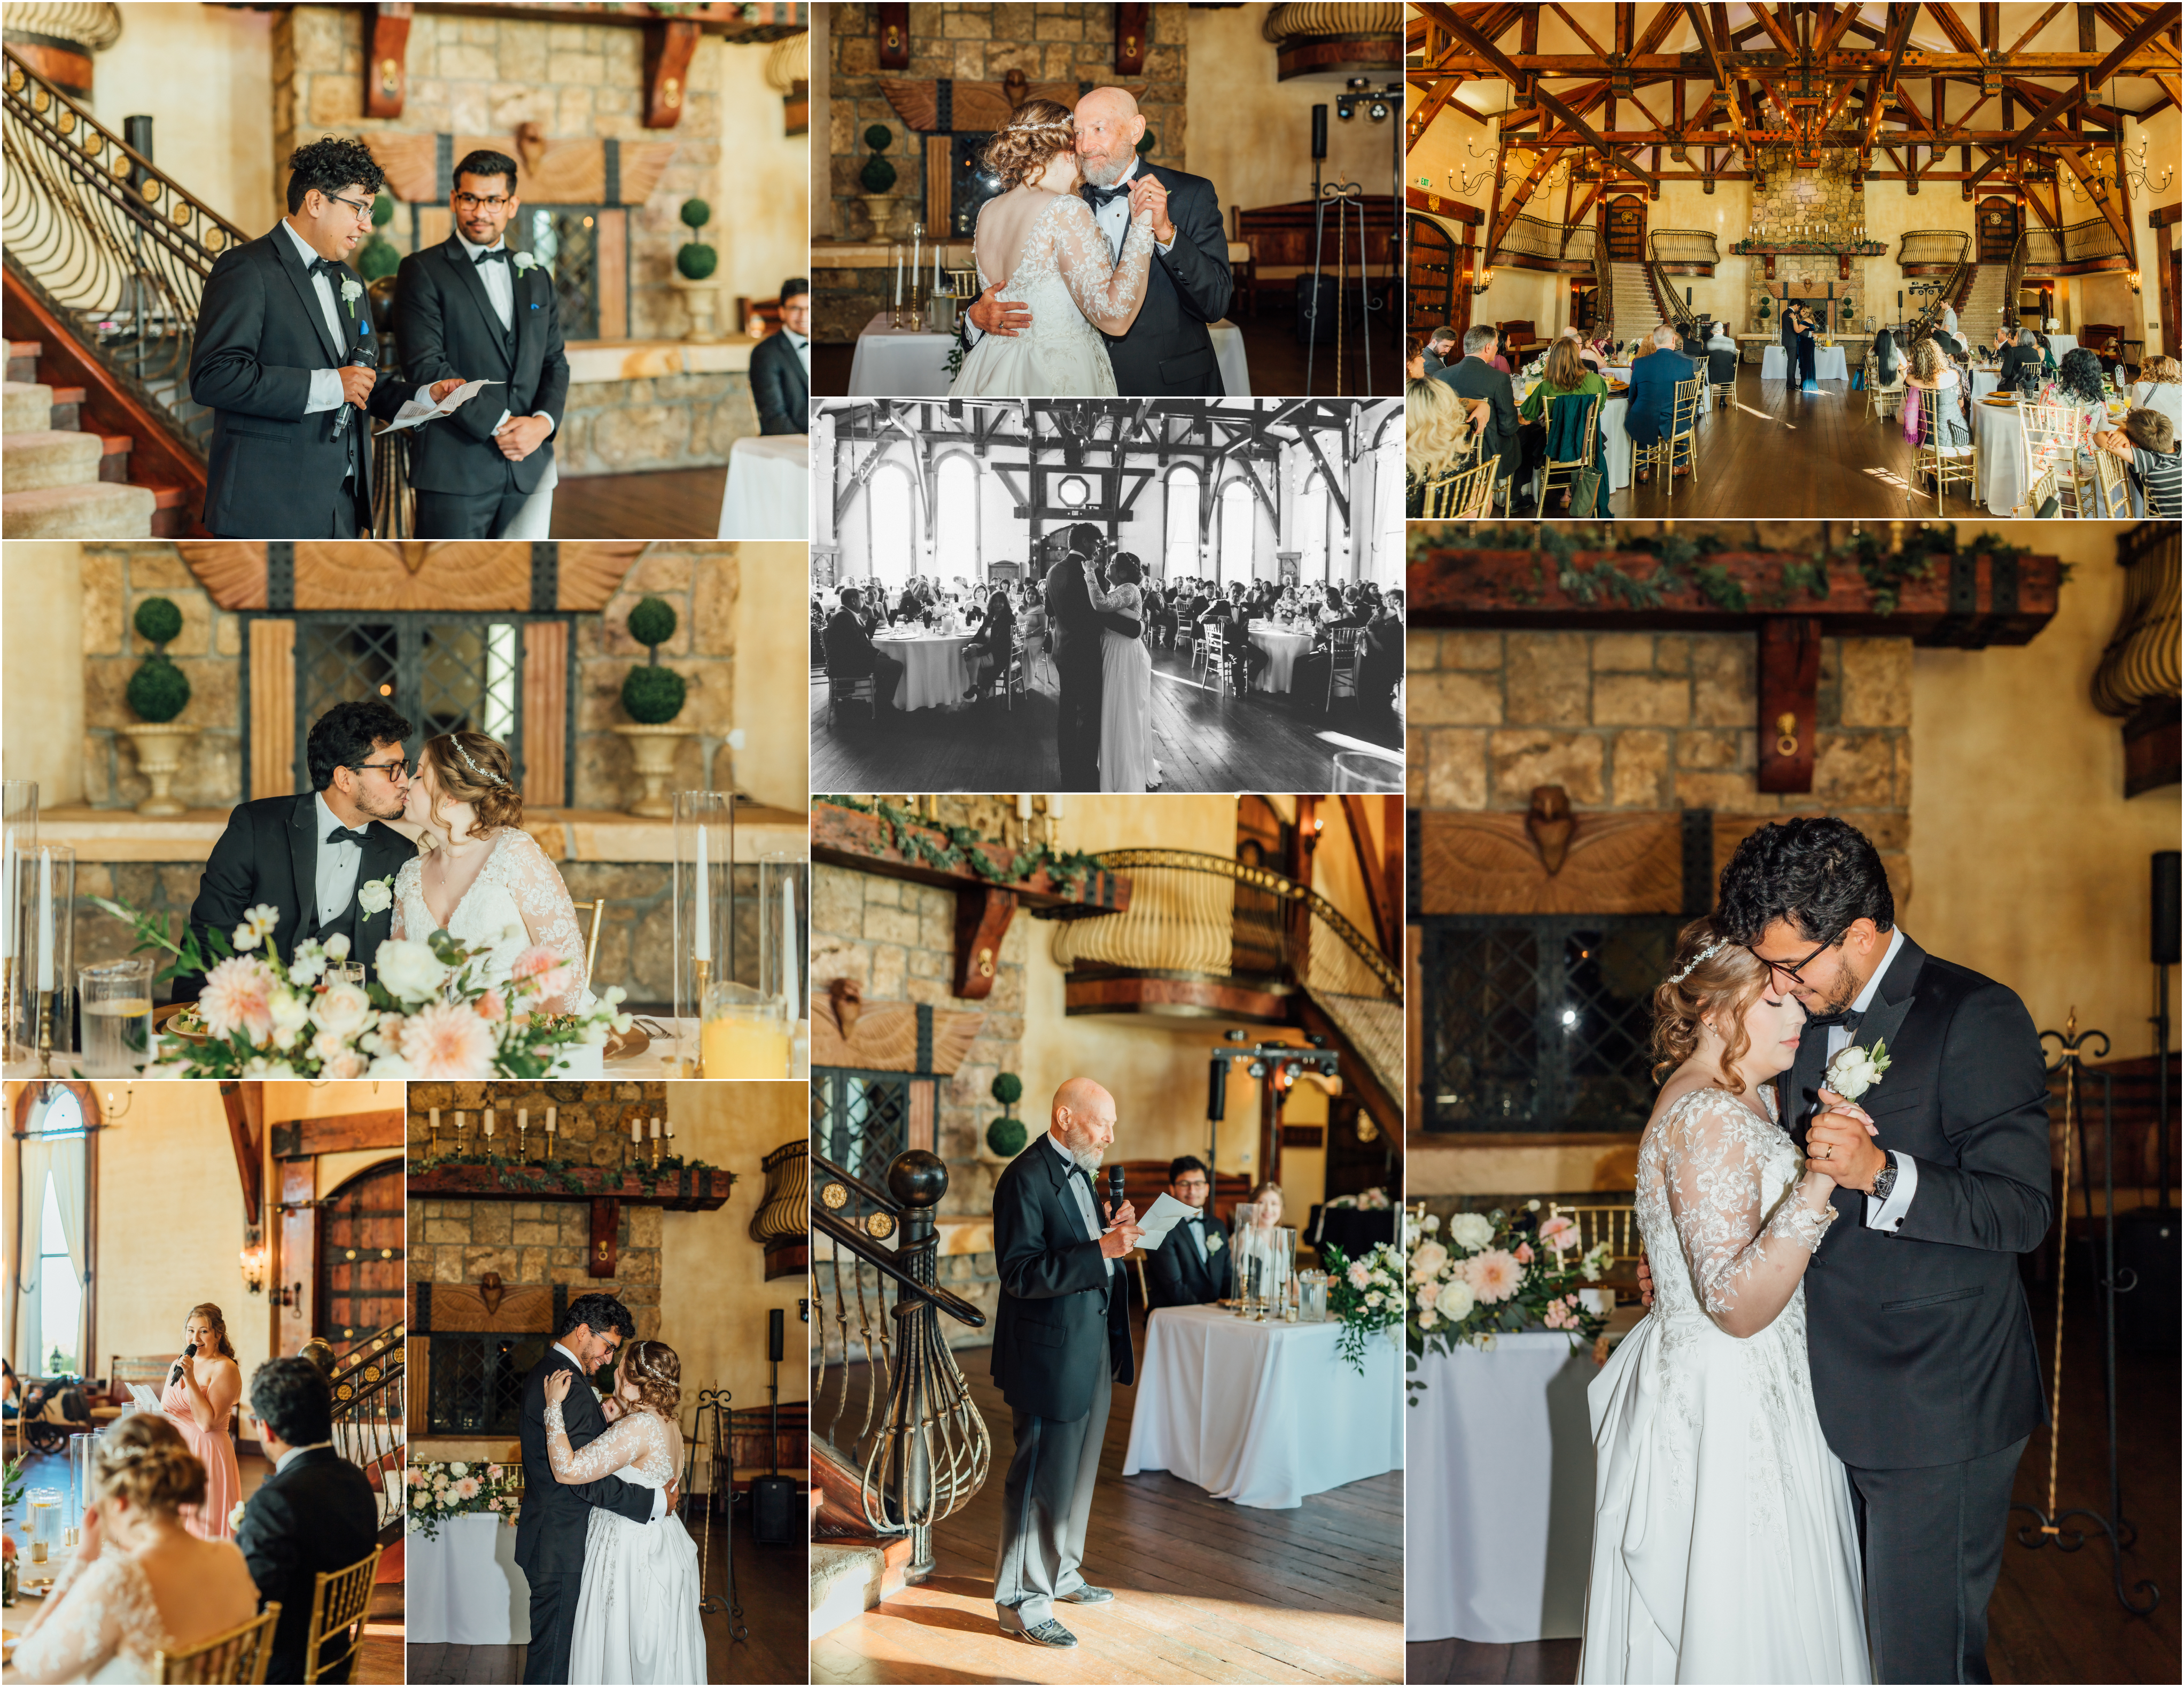 Wadley Farms Reception Photography - First dance and toasts